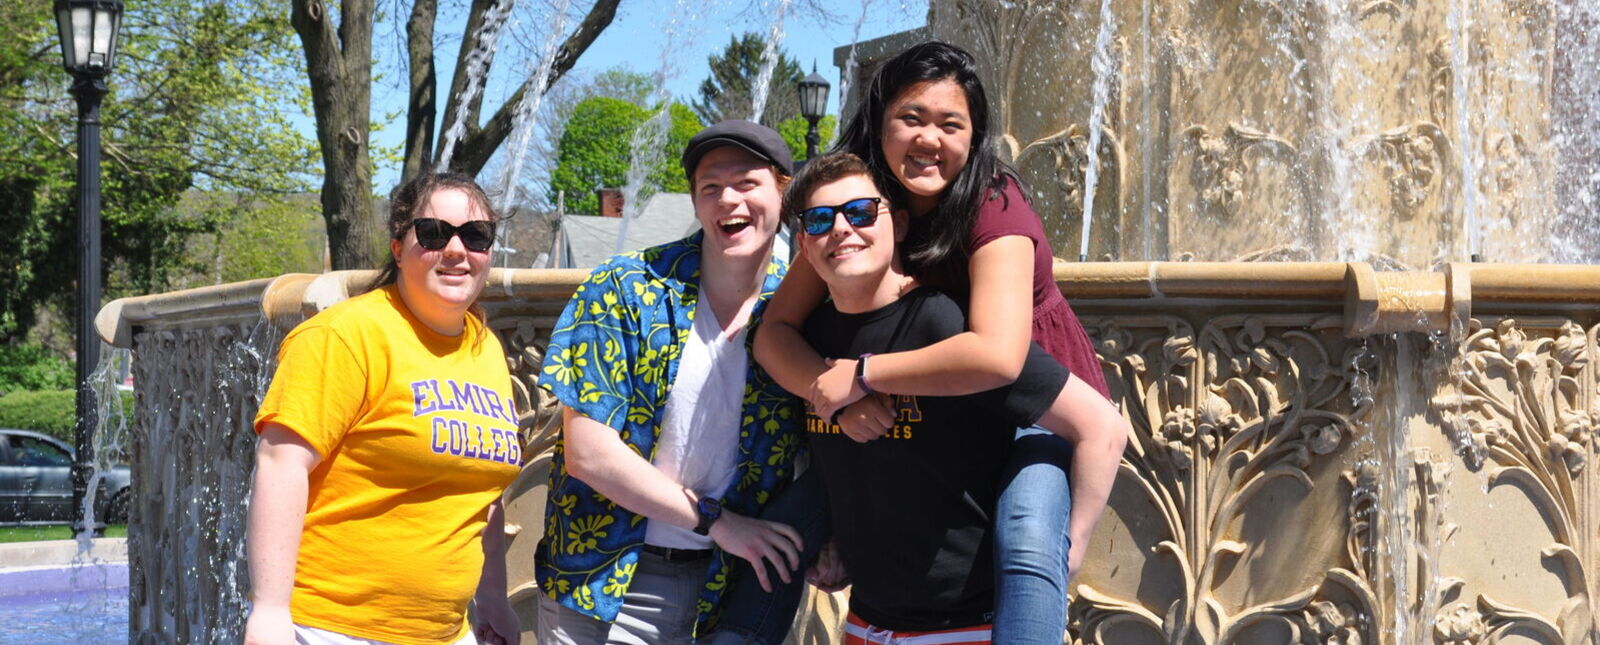 Four Elmira College alumni, one riding piggy back, smile for a picture in the fountain